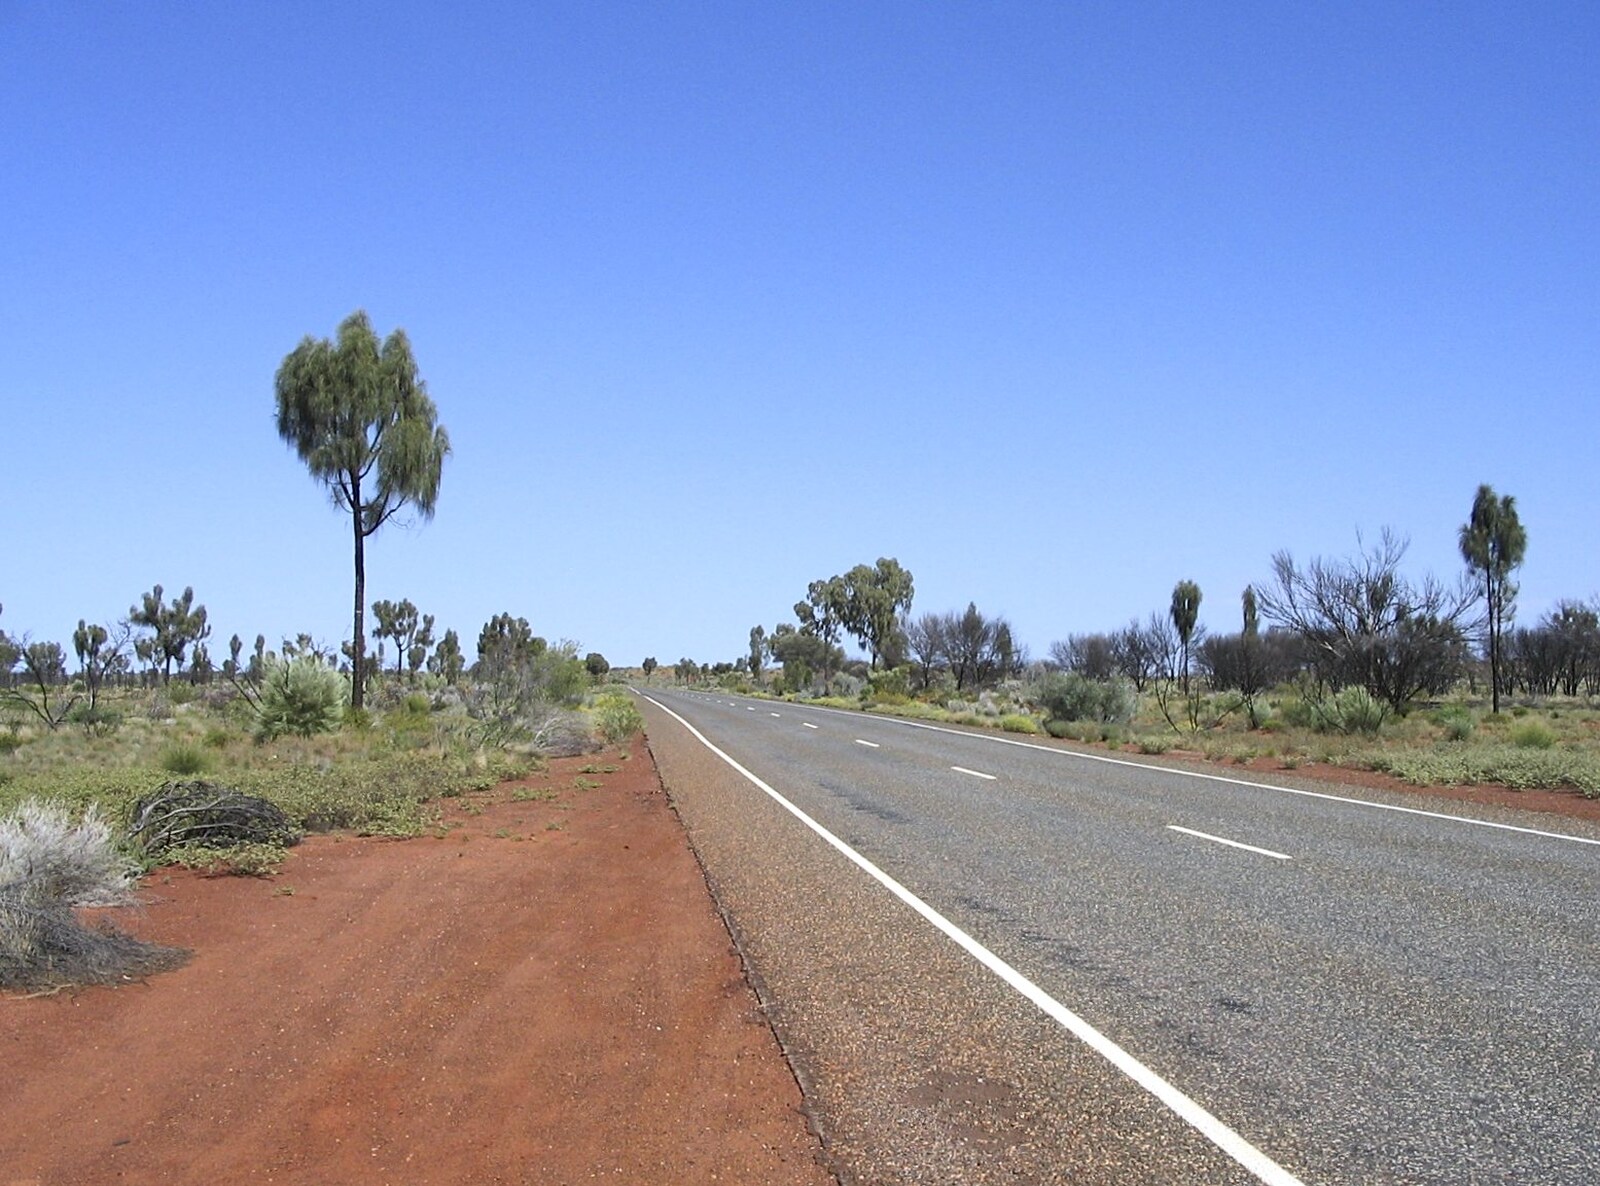 Miles of road with almost no traffic from The Red Centre: Yulara and Uluru, Northern Territories, Australia - 8th October 2004